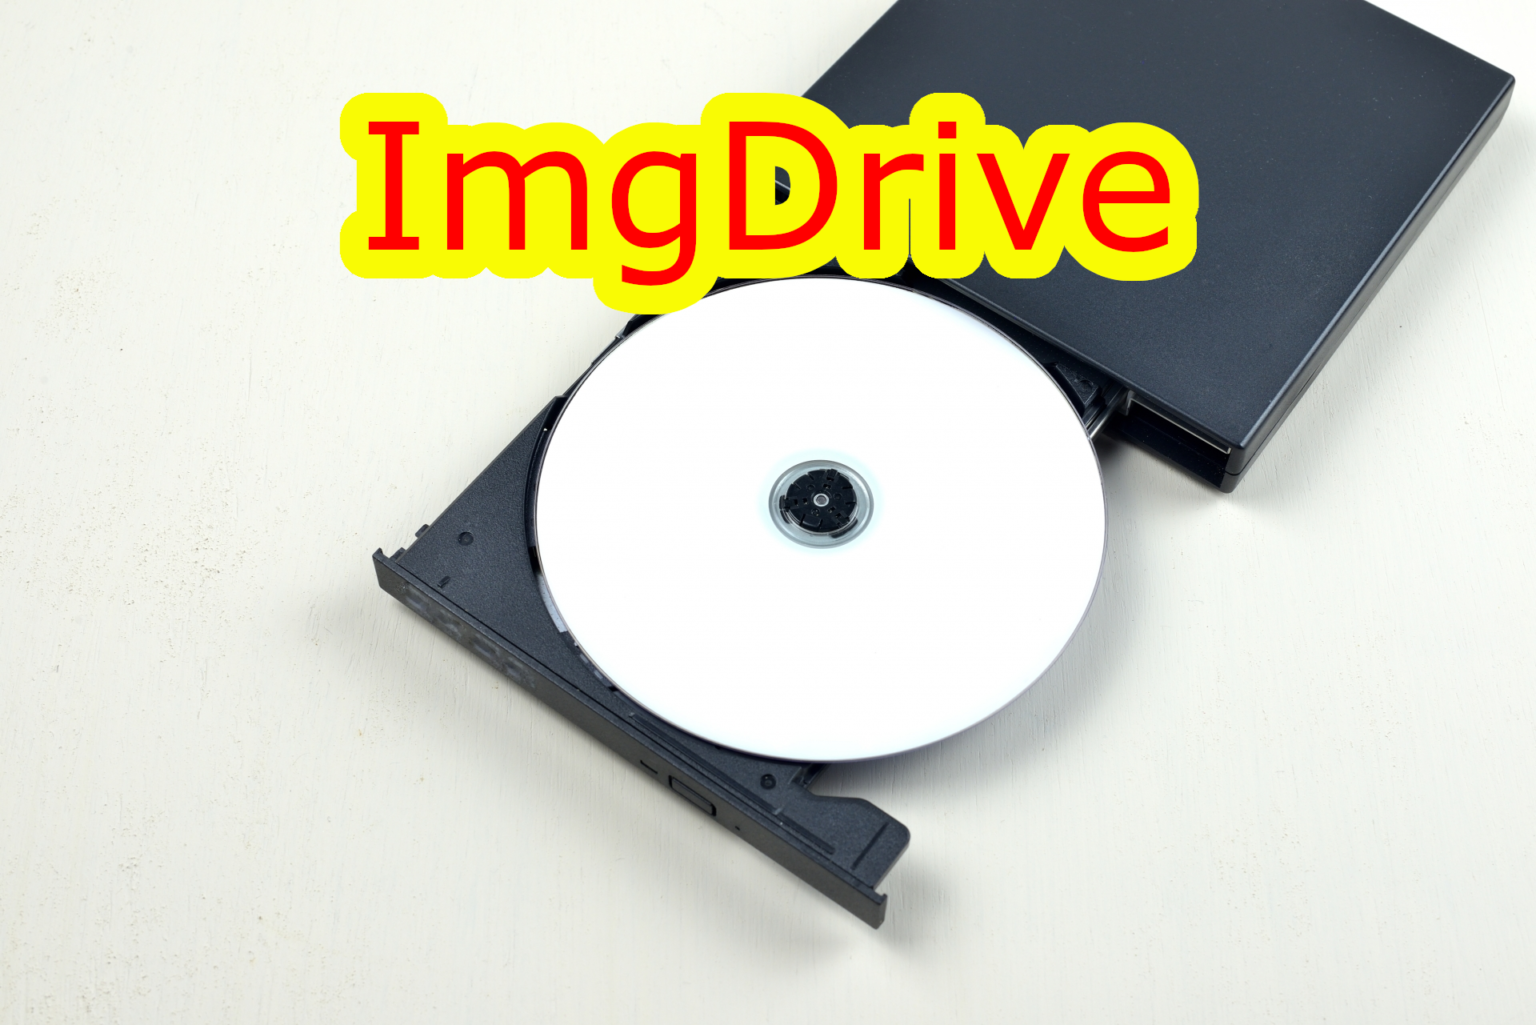 ImgDrive 2.0.7.0 instal the new version for apple